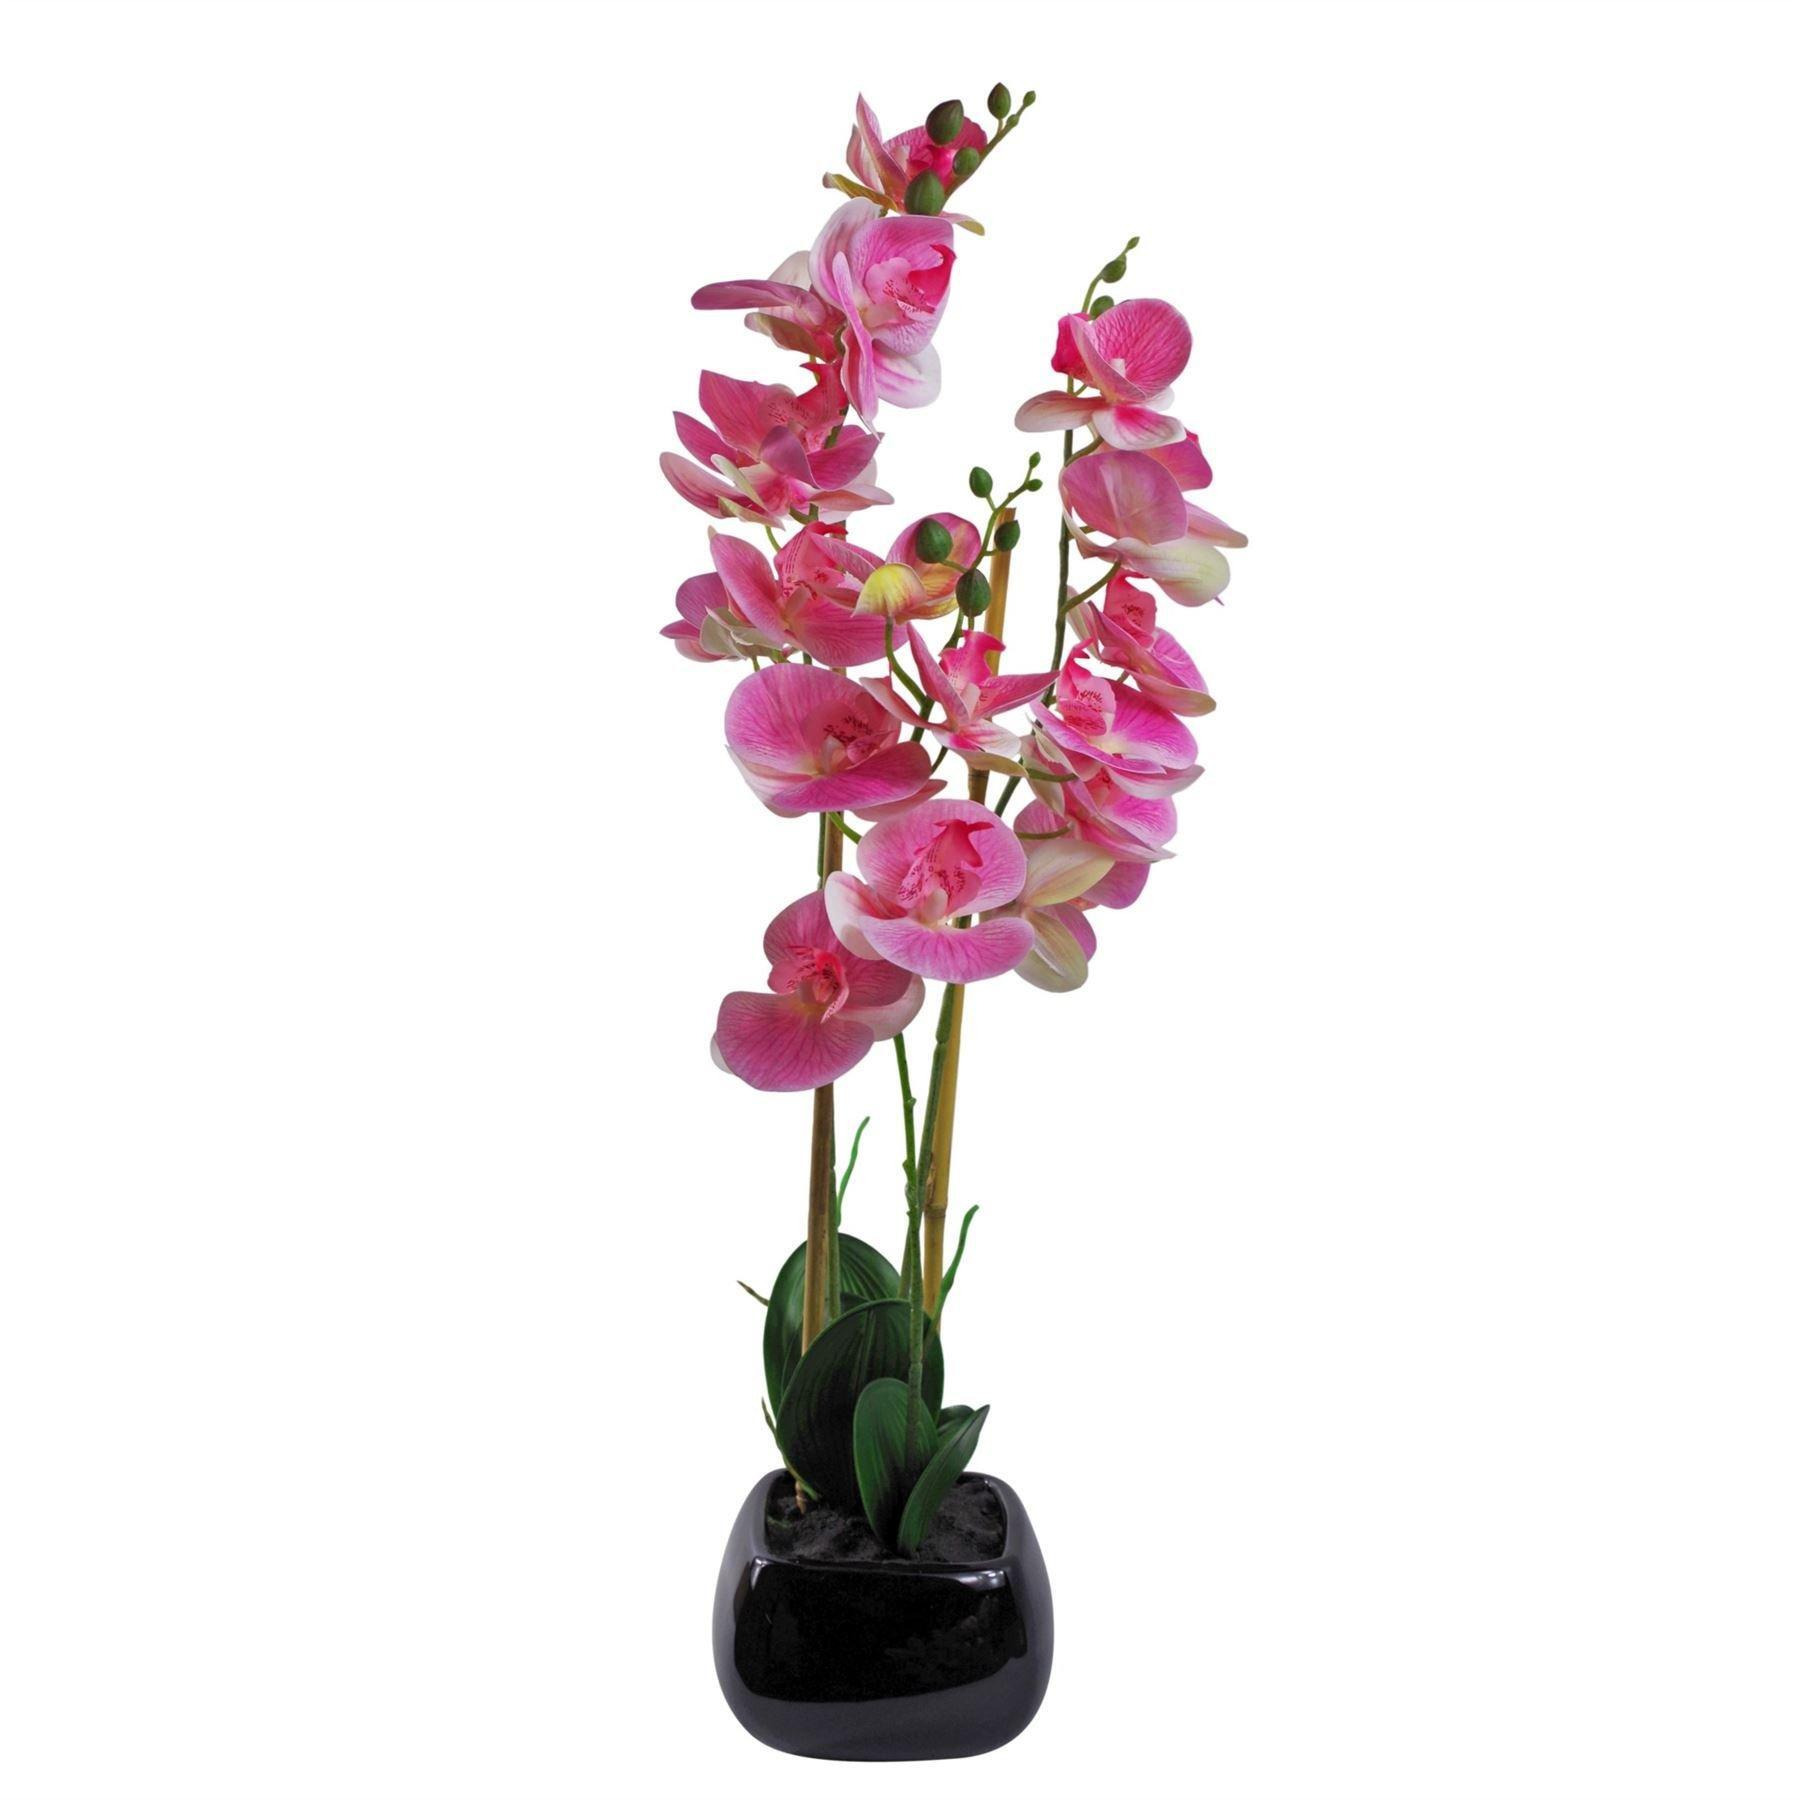 70cm Artificial Orchid Light Pink with Black Ceramic Planter - image 1